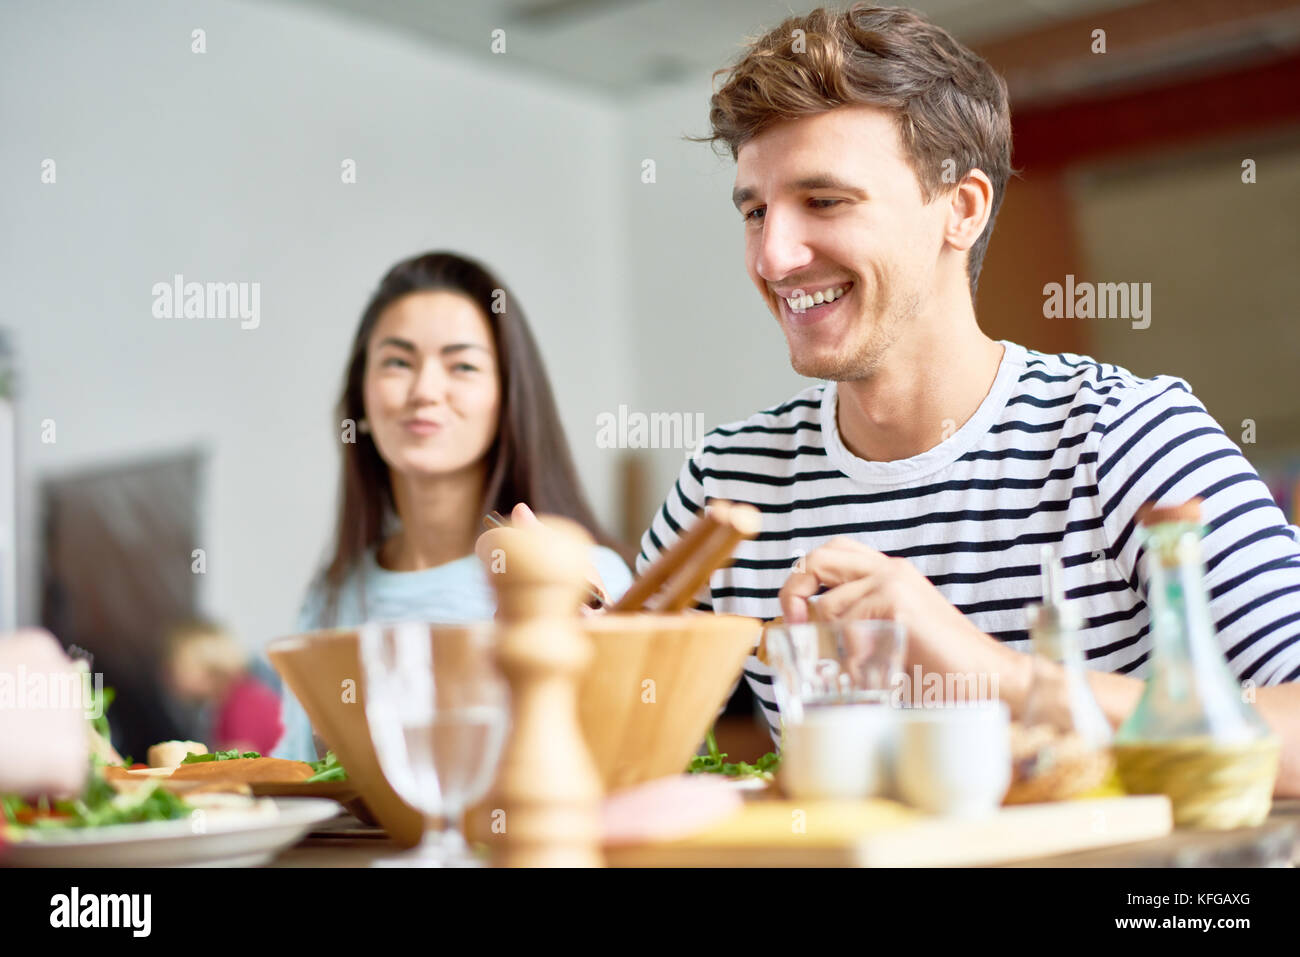 Happy Young Man at Dinner Table Stock Photo